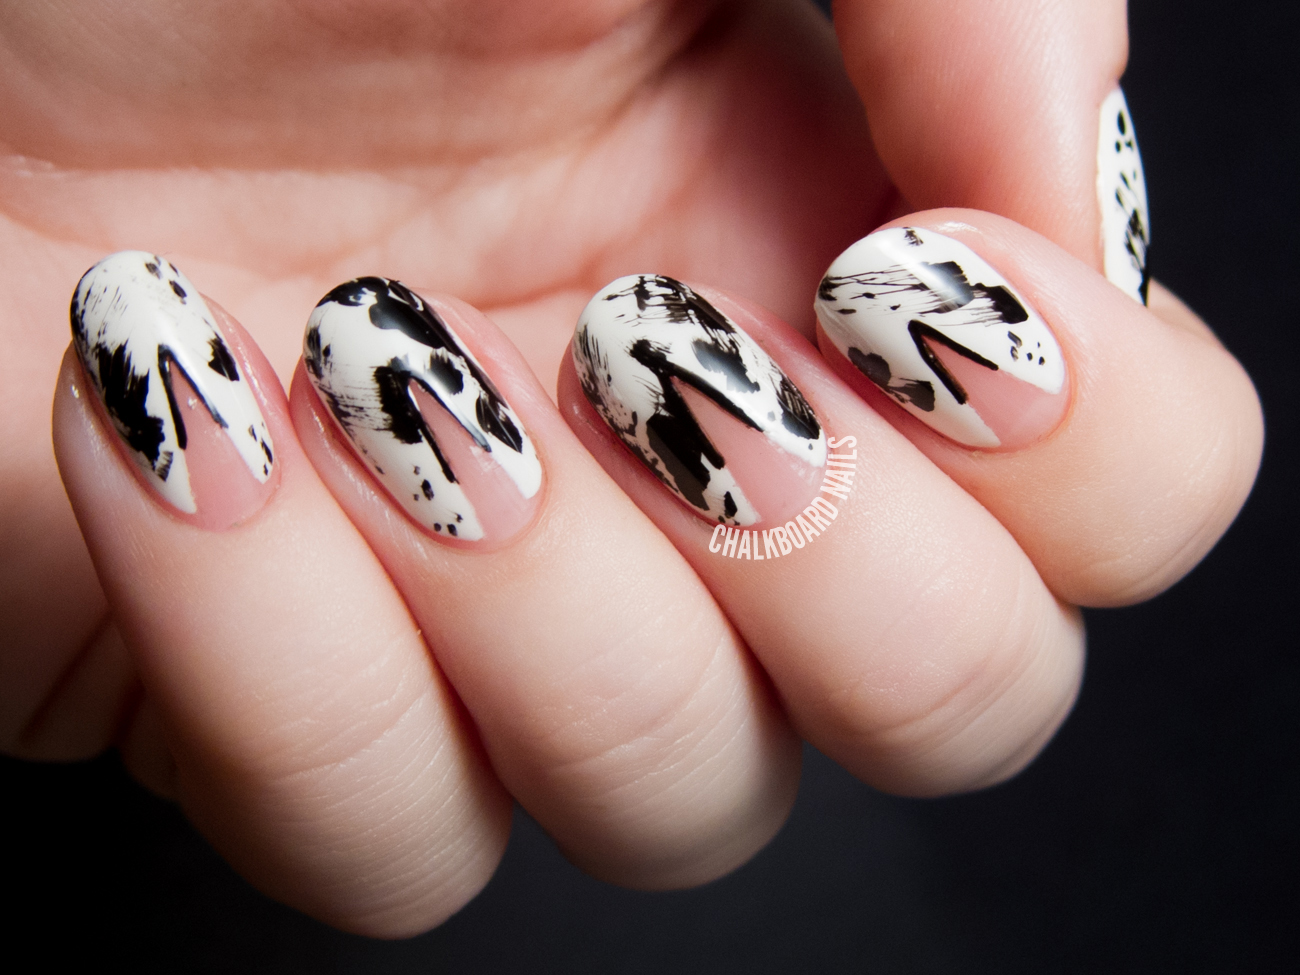 7. Heart Nail Designs with Negative Space - wide 8